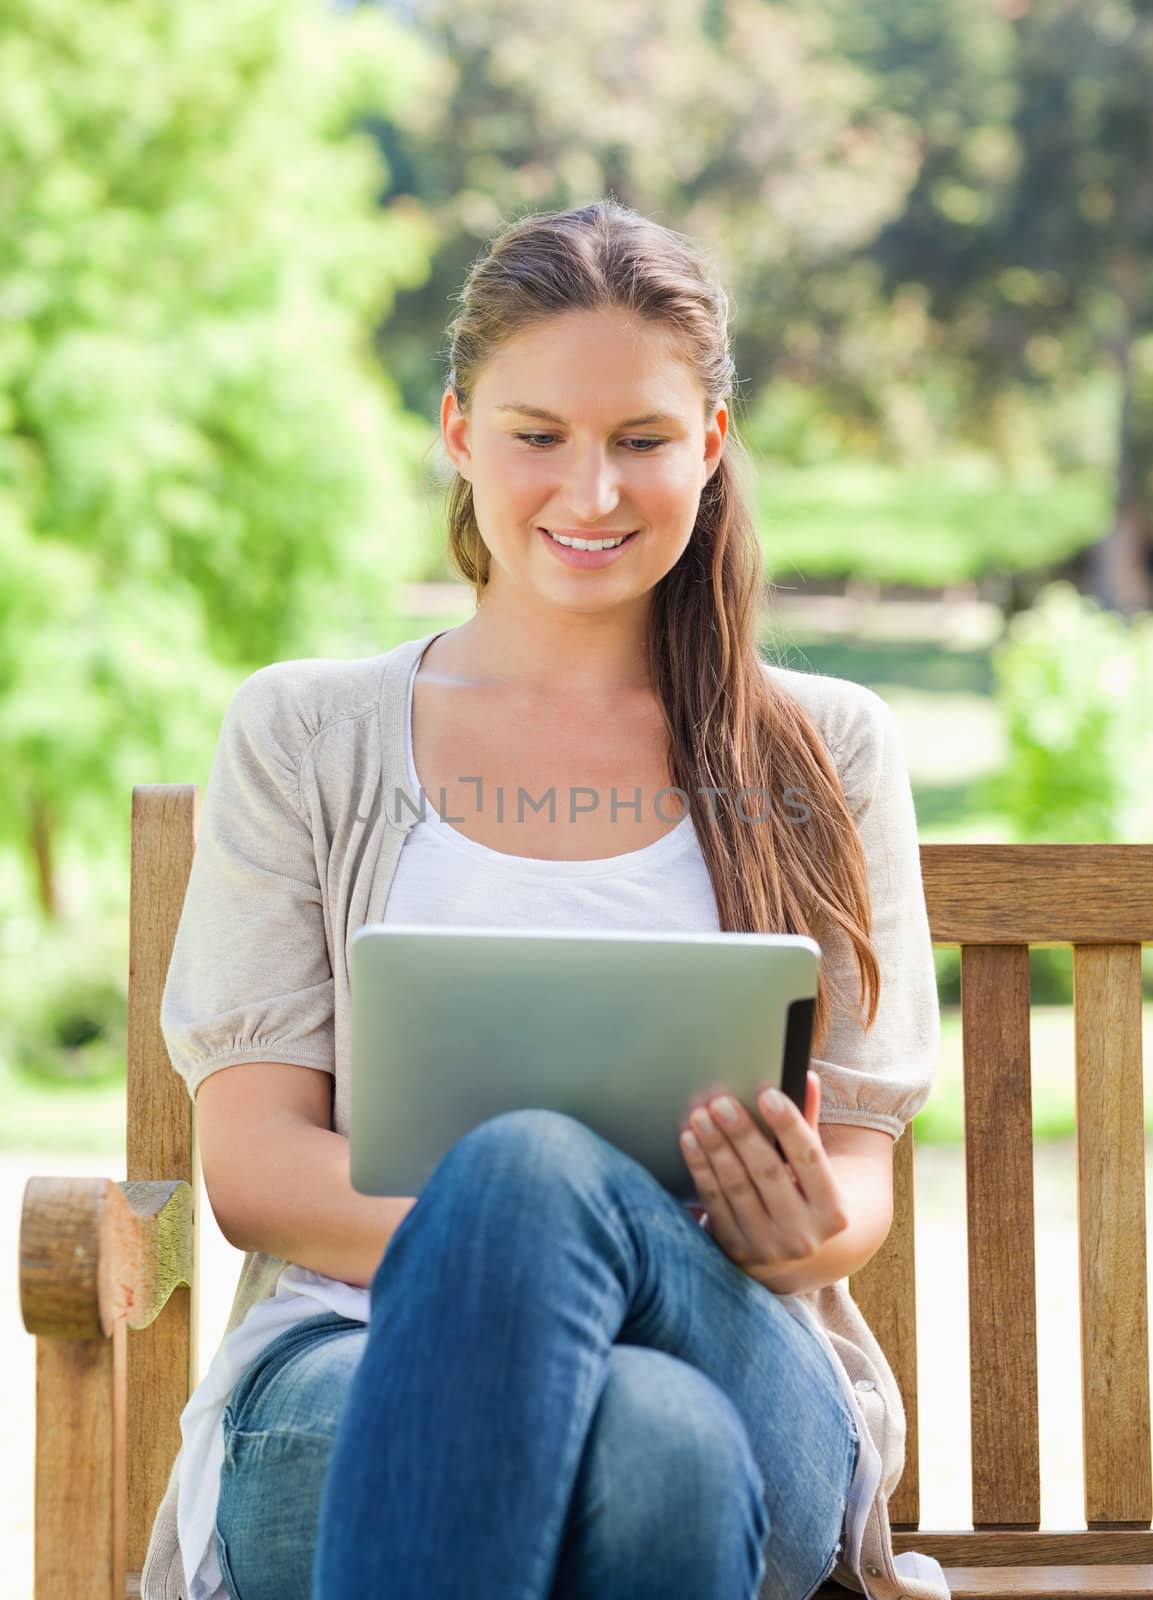 Smiling woman using a tablet computer on a park bench by Wavebreakmedia